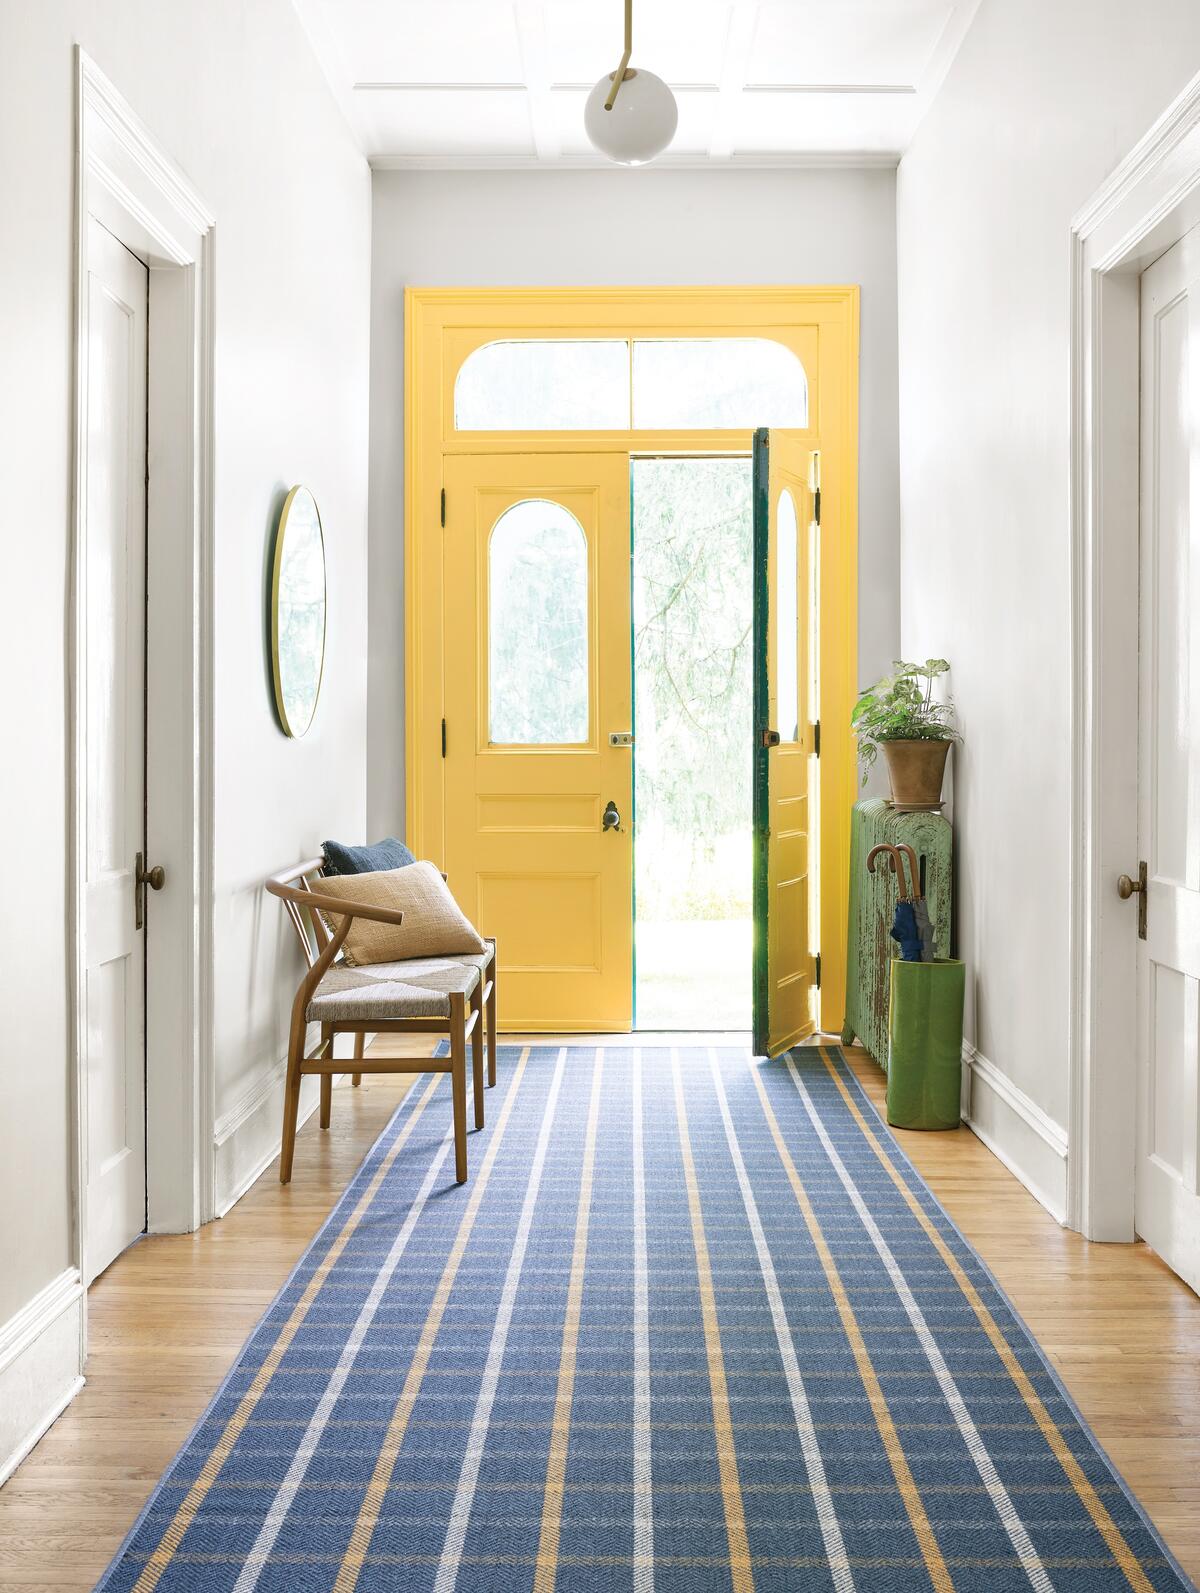 Custom-fit any space fast with Annie Selke’s hand-crafted rugs